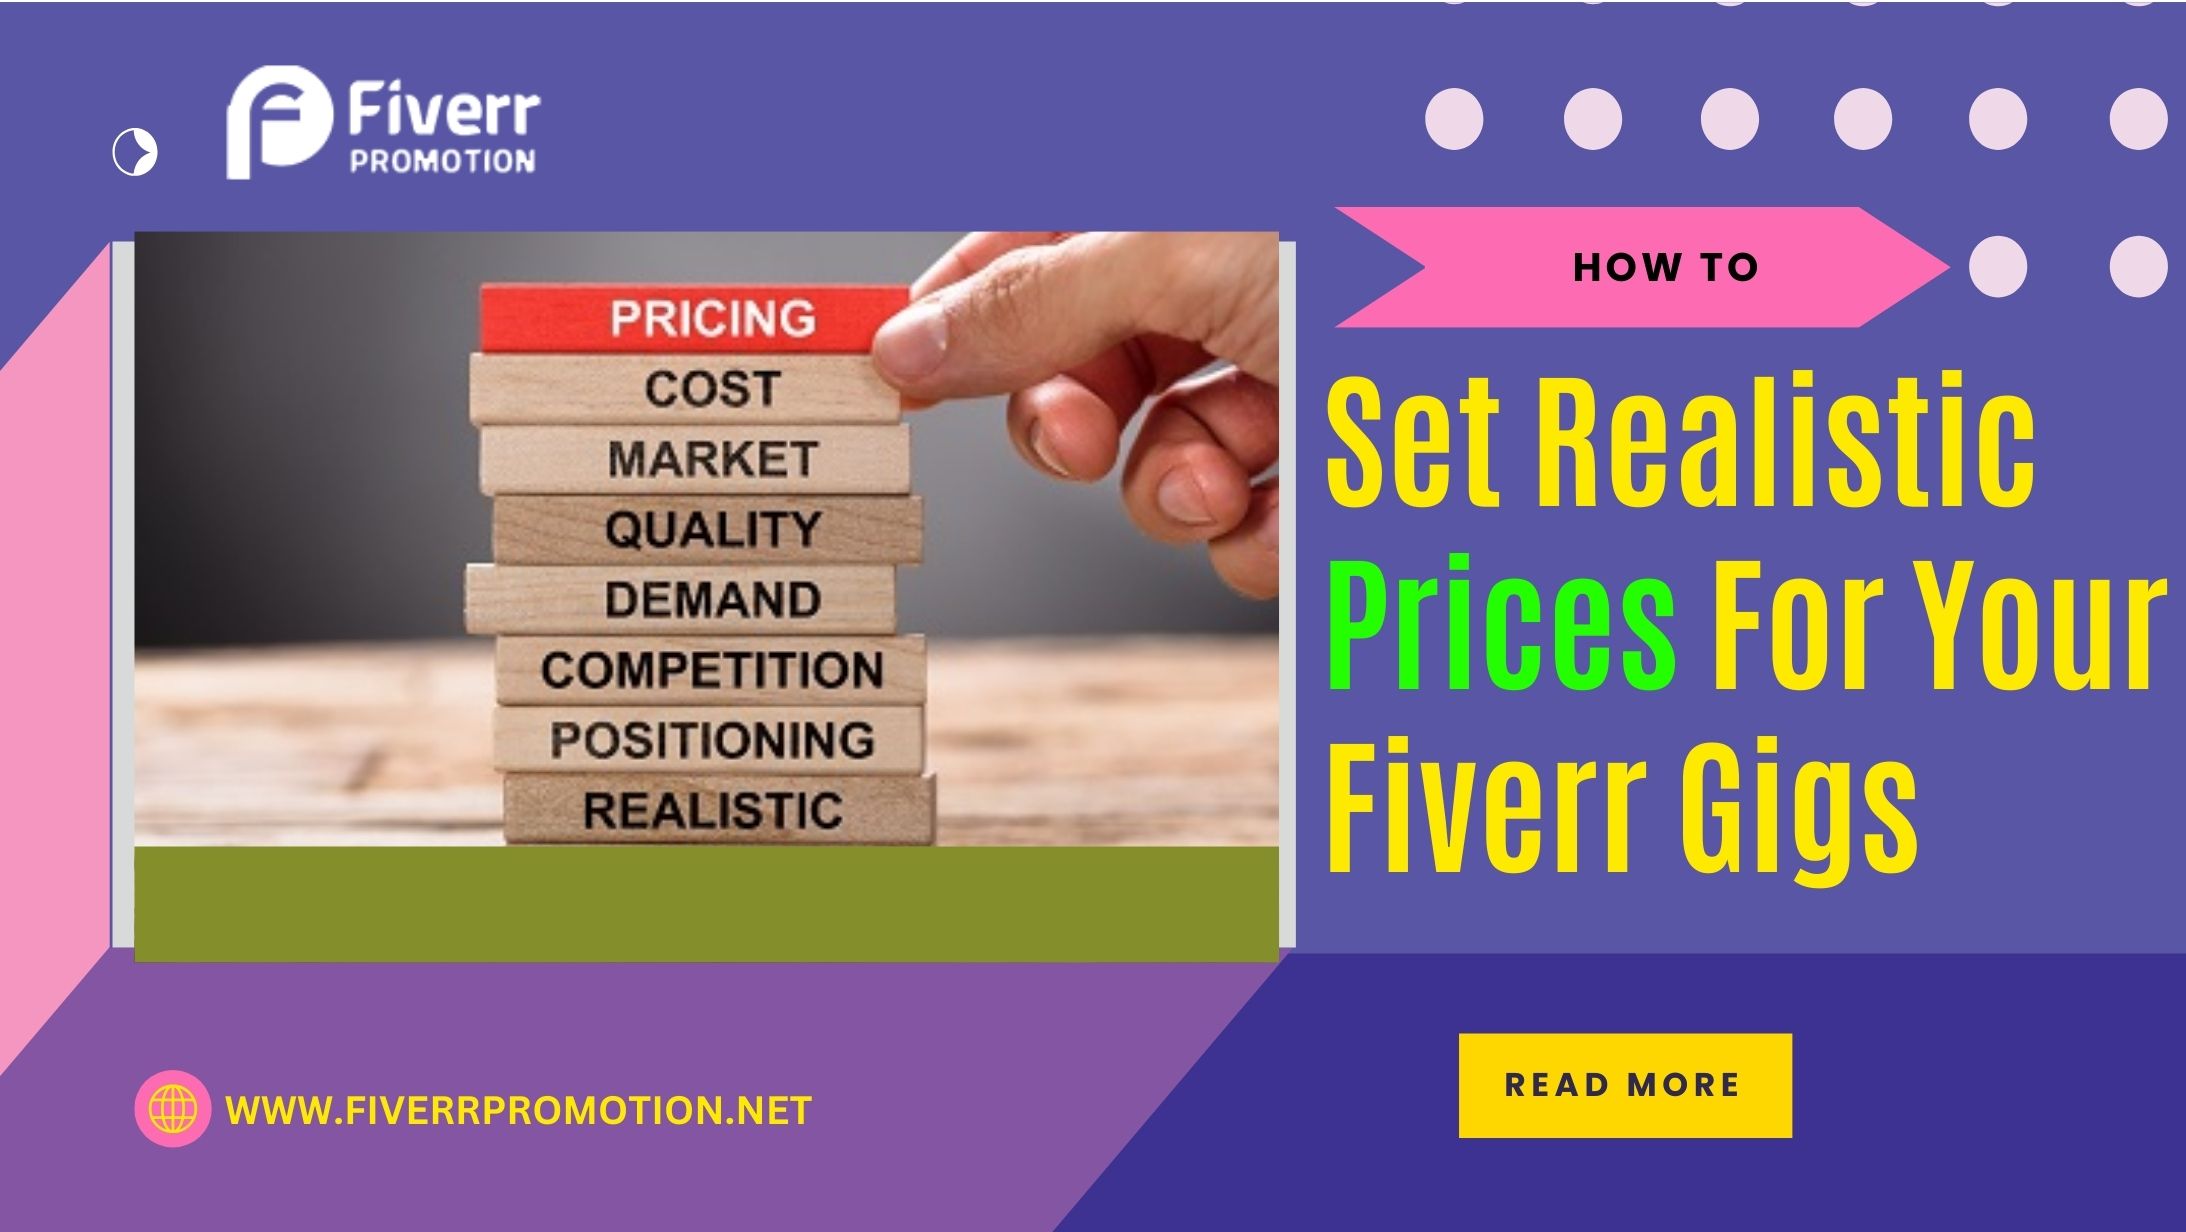 How to set realistic prices for your Fiverr gigs